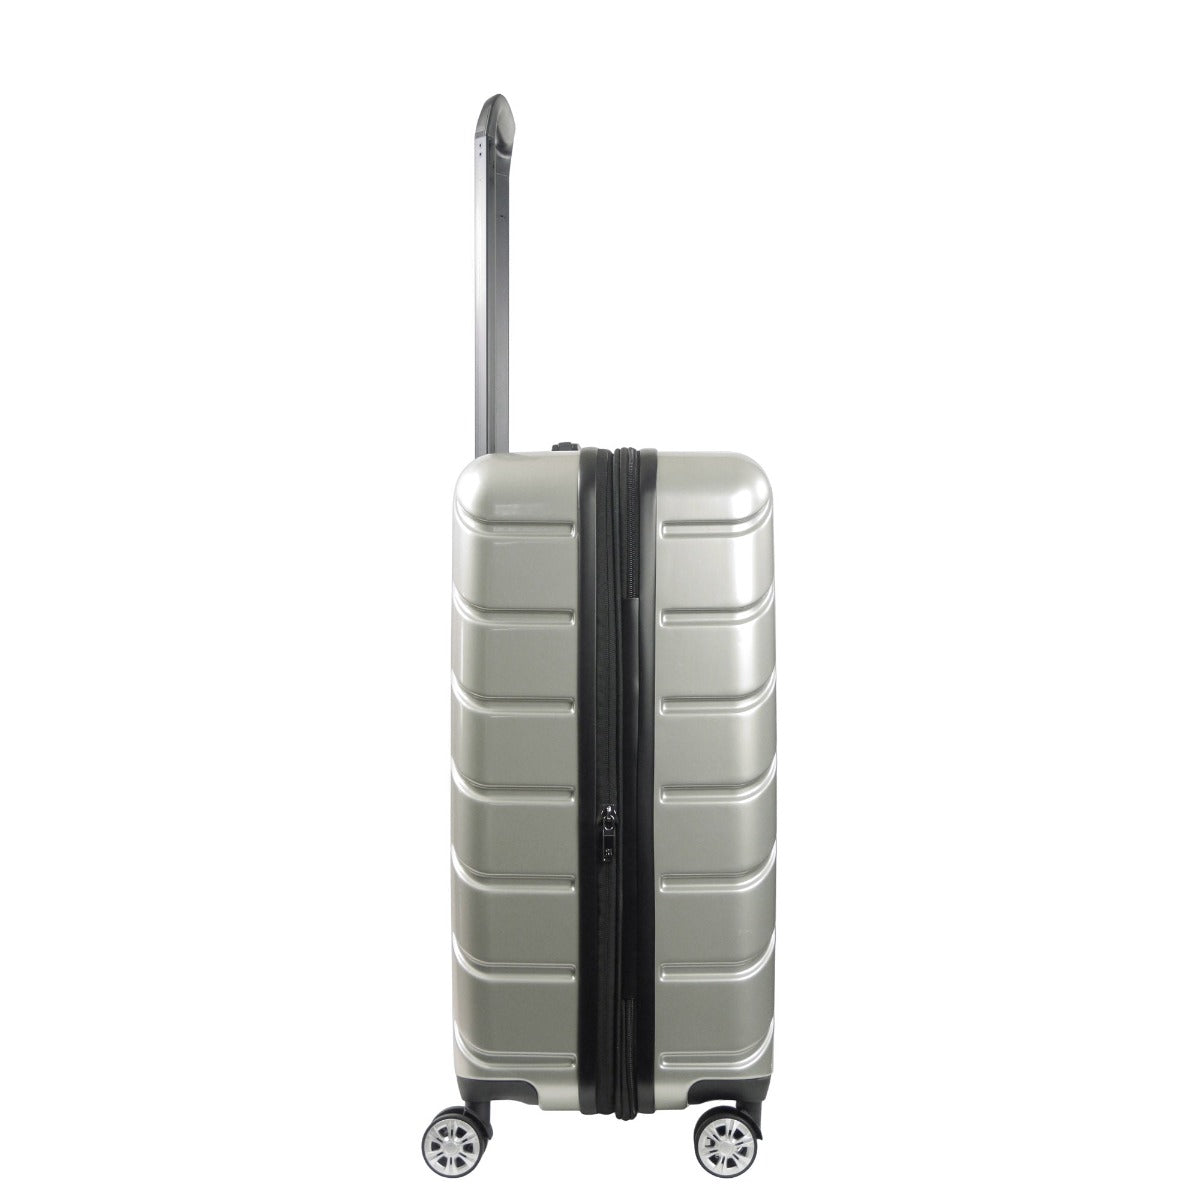 Ful Velocity 27" Expandable Silver Hardside Spinner Suitcase Luggage Check-in Bag